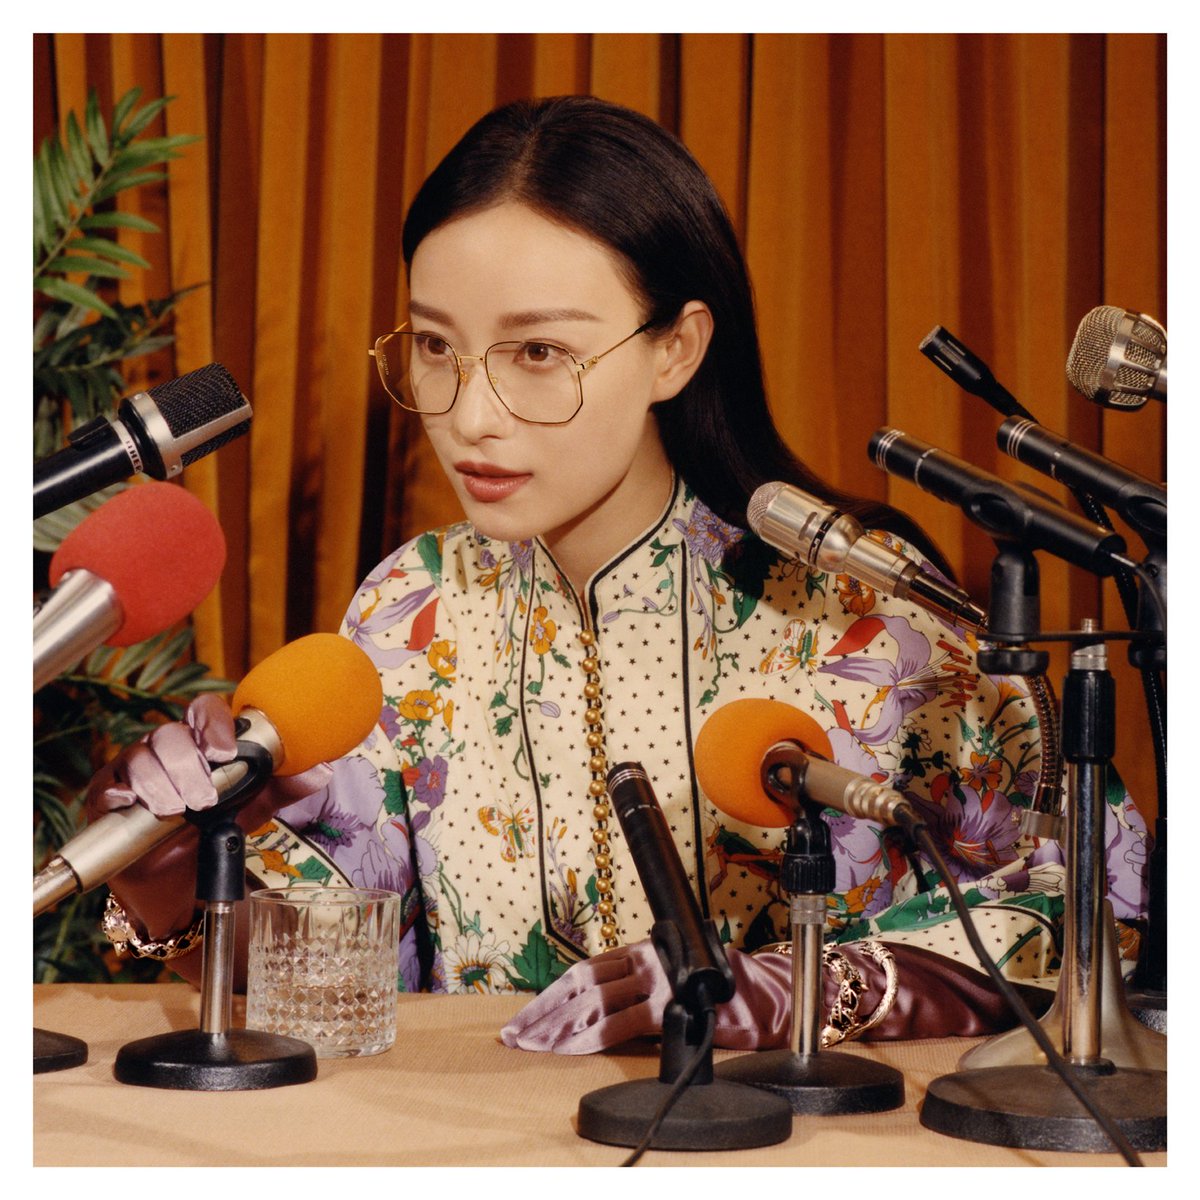 gucci ar Twitter: "Unveiling the new #GucciEyewear campaign featuring Ni Ni  shot by #ColinDodgson. Inspired by a press conference in Hollywood in the  70s and 80s, the famed actress wears a pair